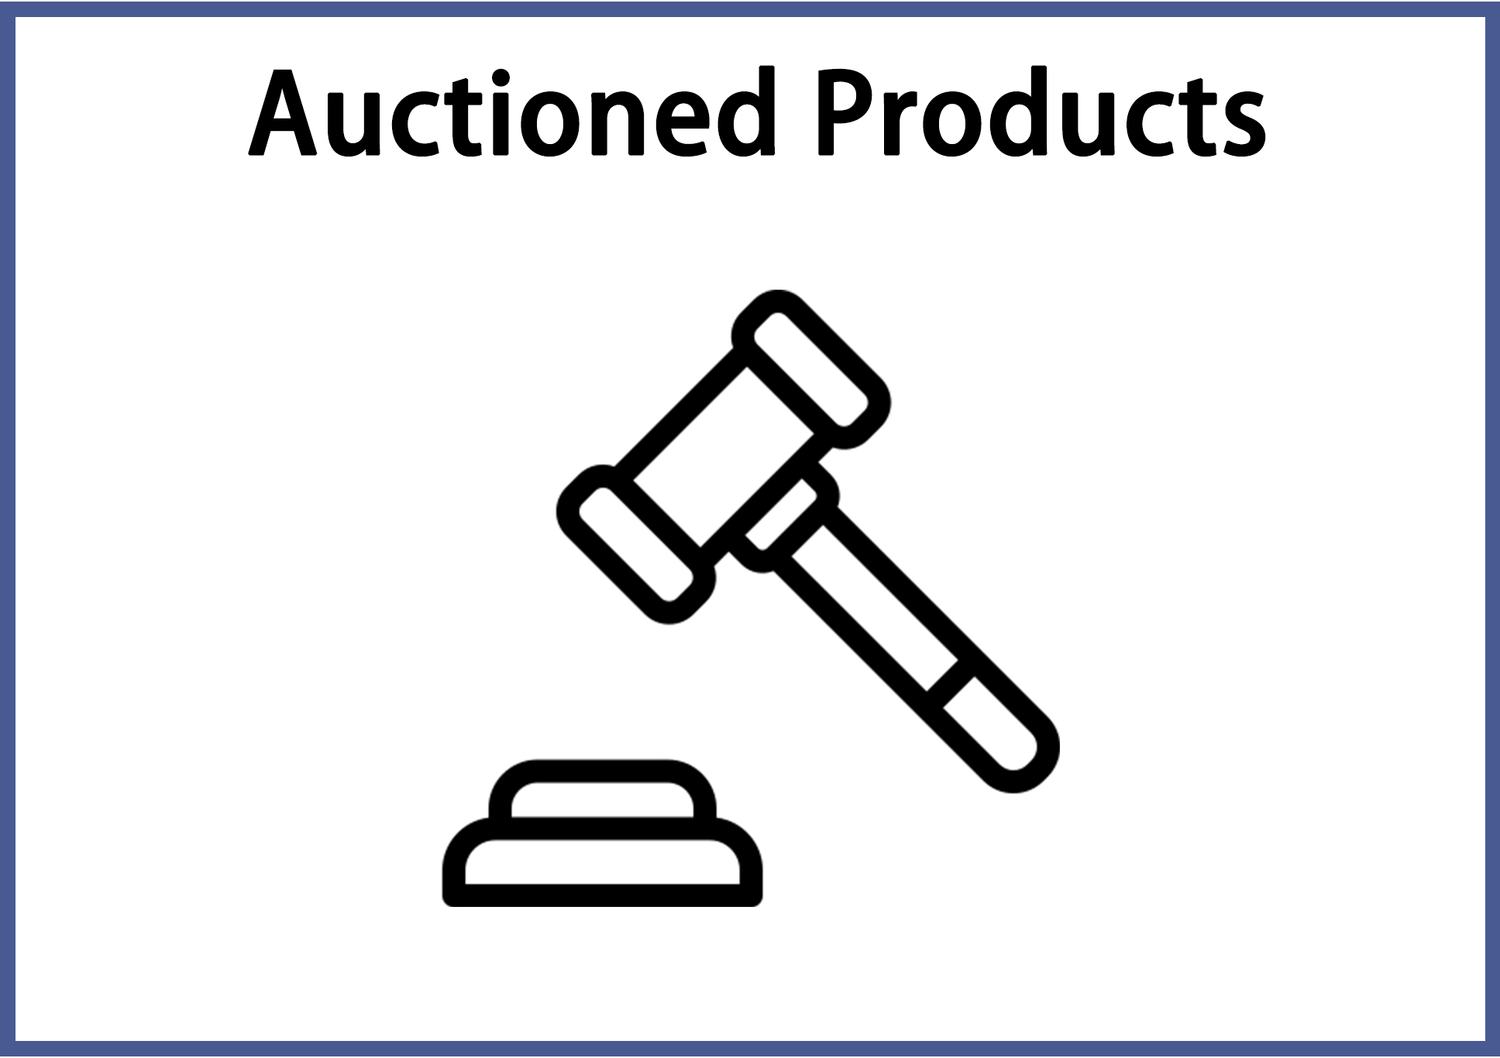 Auctioned Products